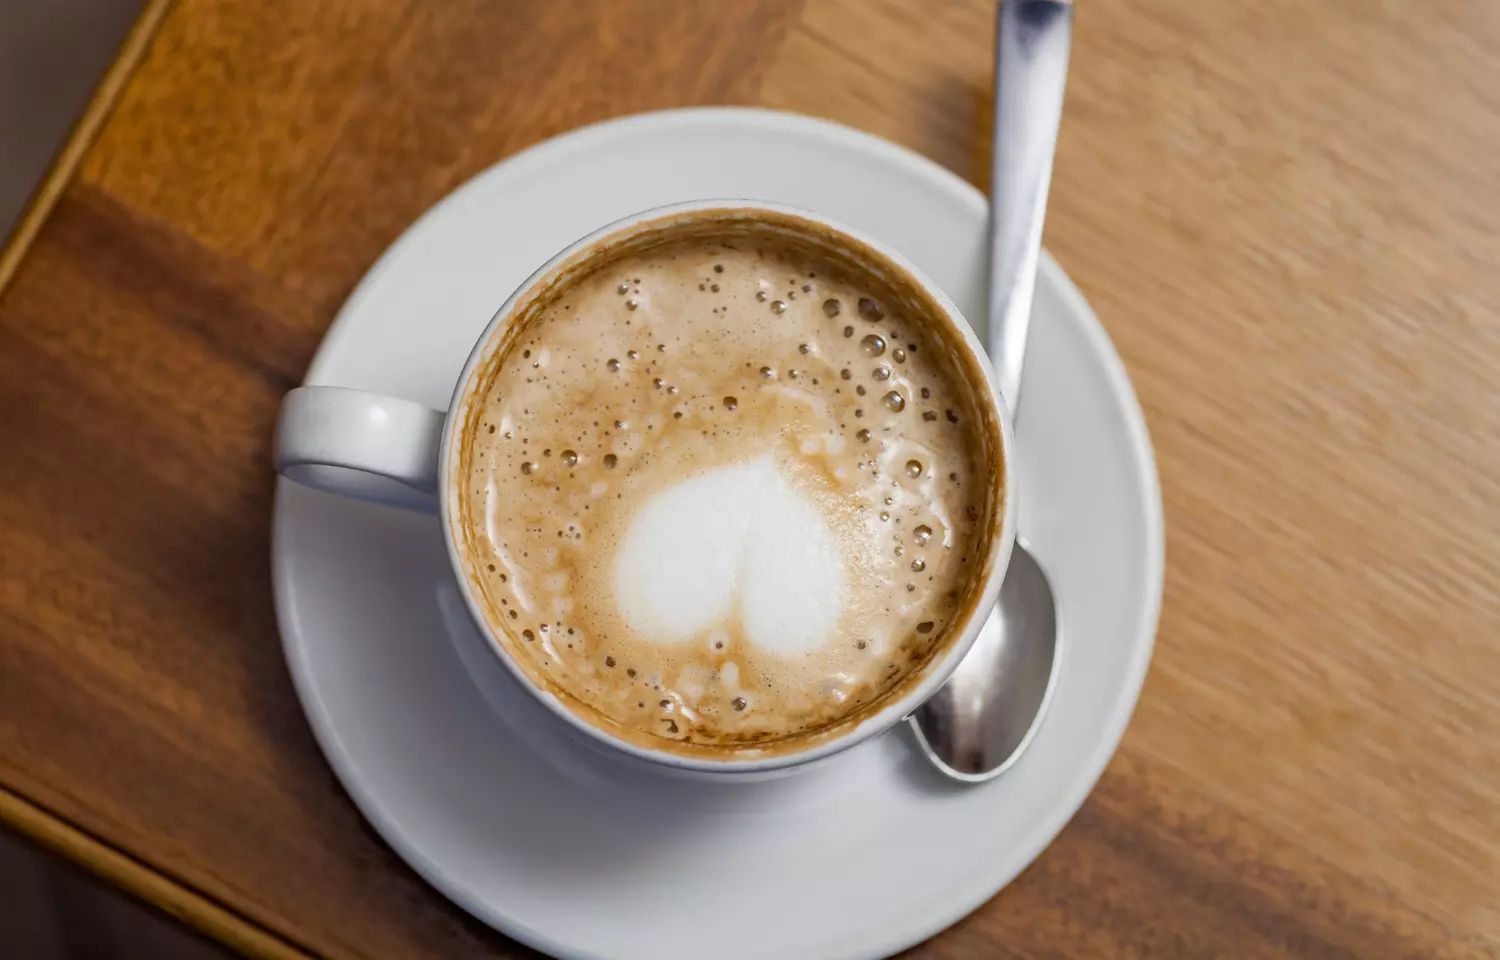 Coffee consumption whether Sweetened or unsweetened associated with lower death risk